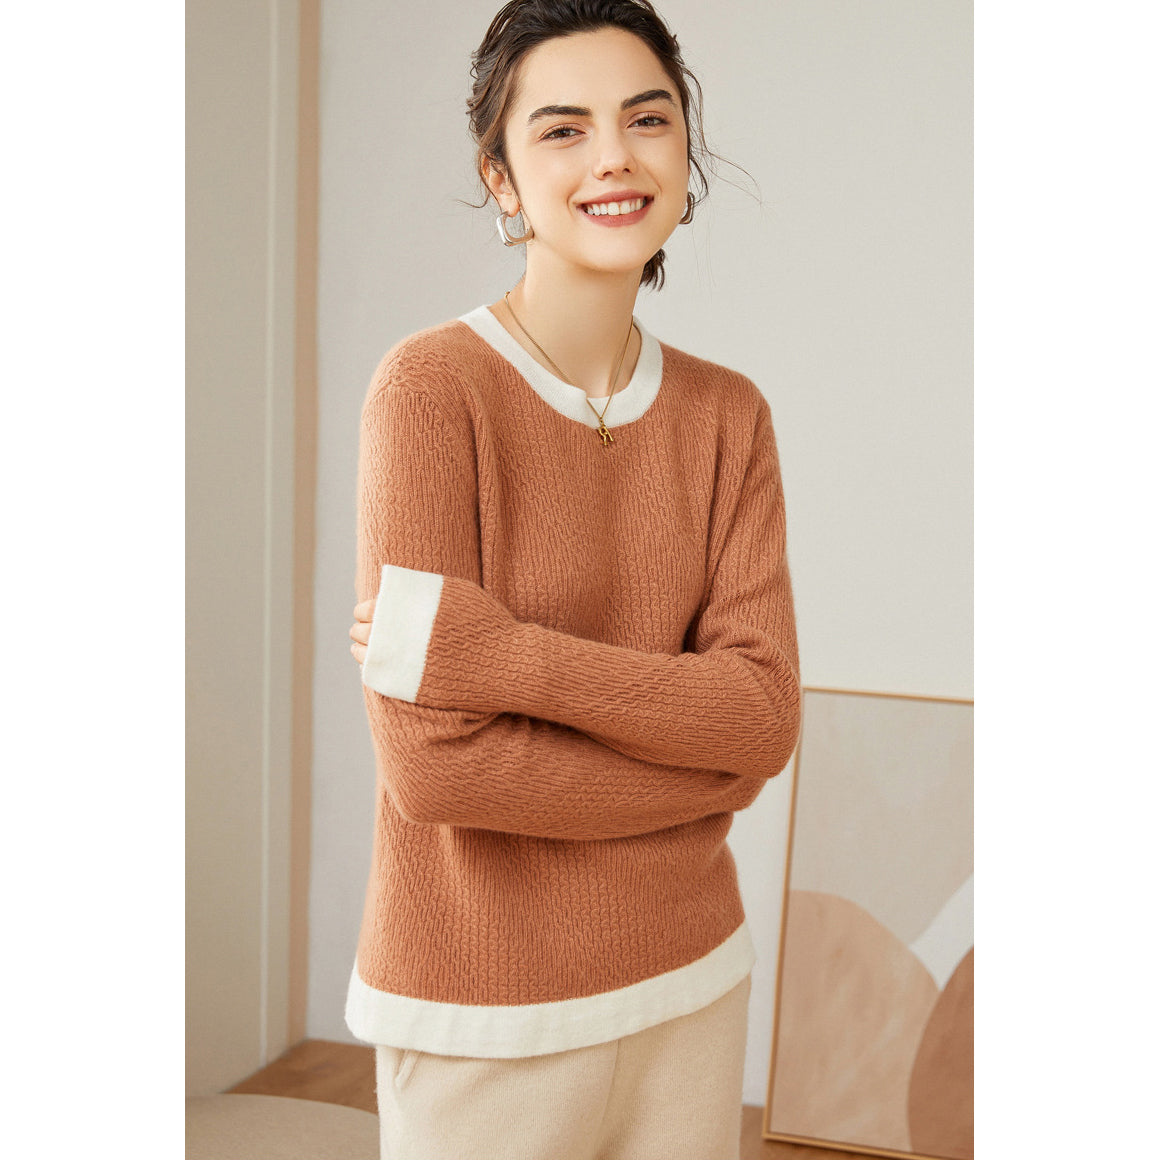 100% Pure Women Cashmere Sweater Mixed Long Sleeve Pullover Cashmere Sweater